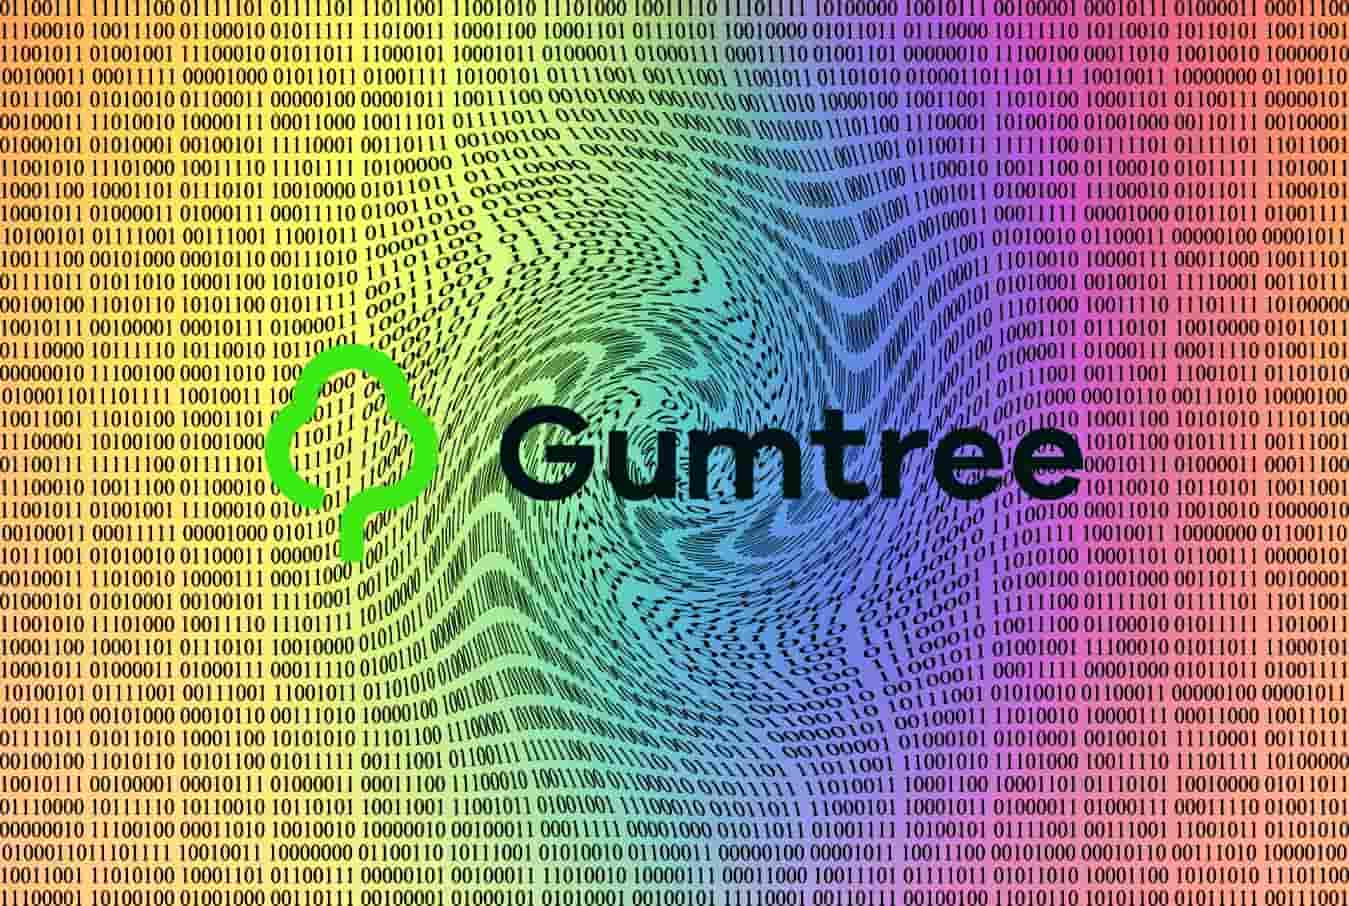 Gumtree exposed personal and GPS location of users through source code